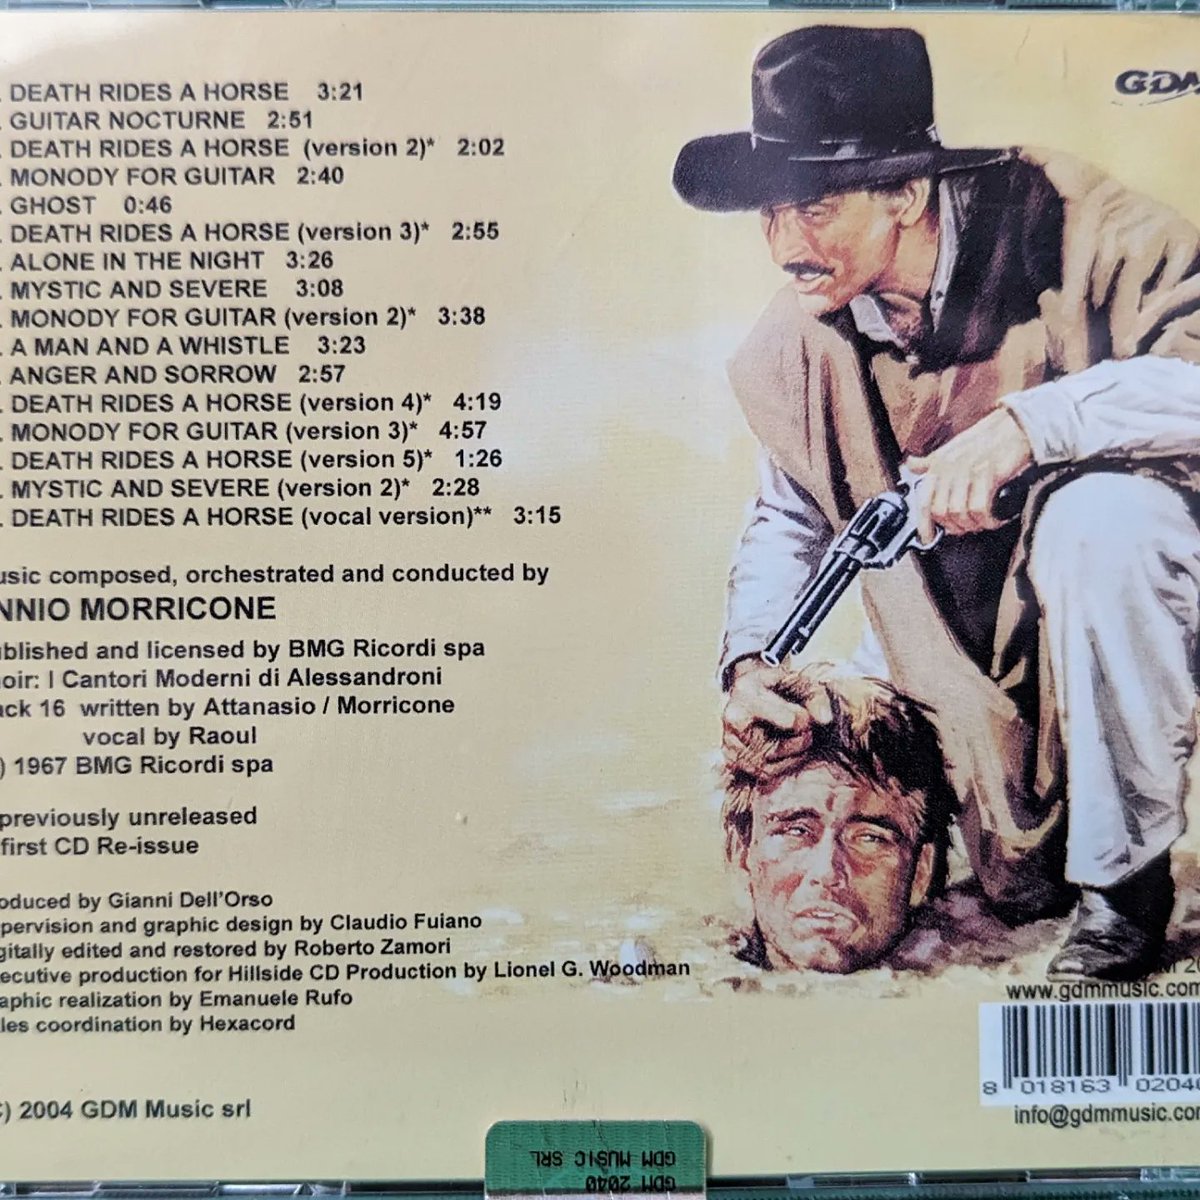 New Arrival
Death Rides a Horse Soundtrack on CD

#enniomorricone
#deathridesahorse #leevancleef #johnphilliplaw j #cdcollection #recordcollection #soundtrack #spaghettiwestern #spaghettiwesternmusic